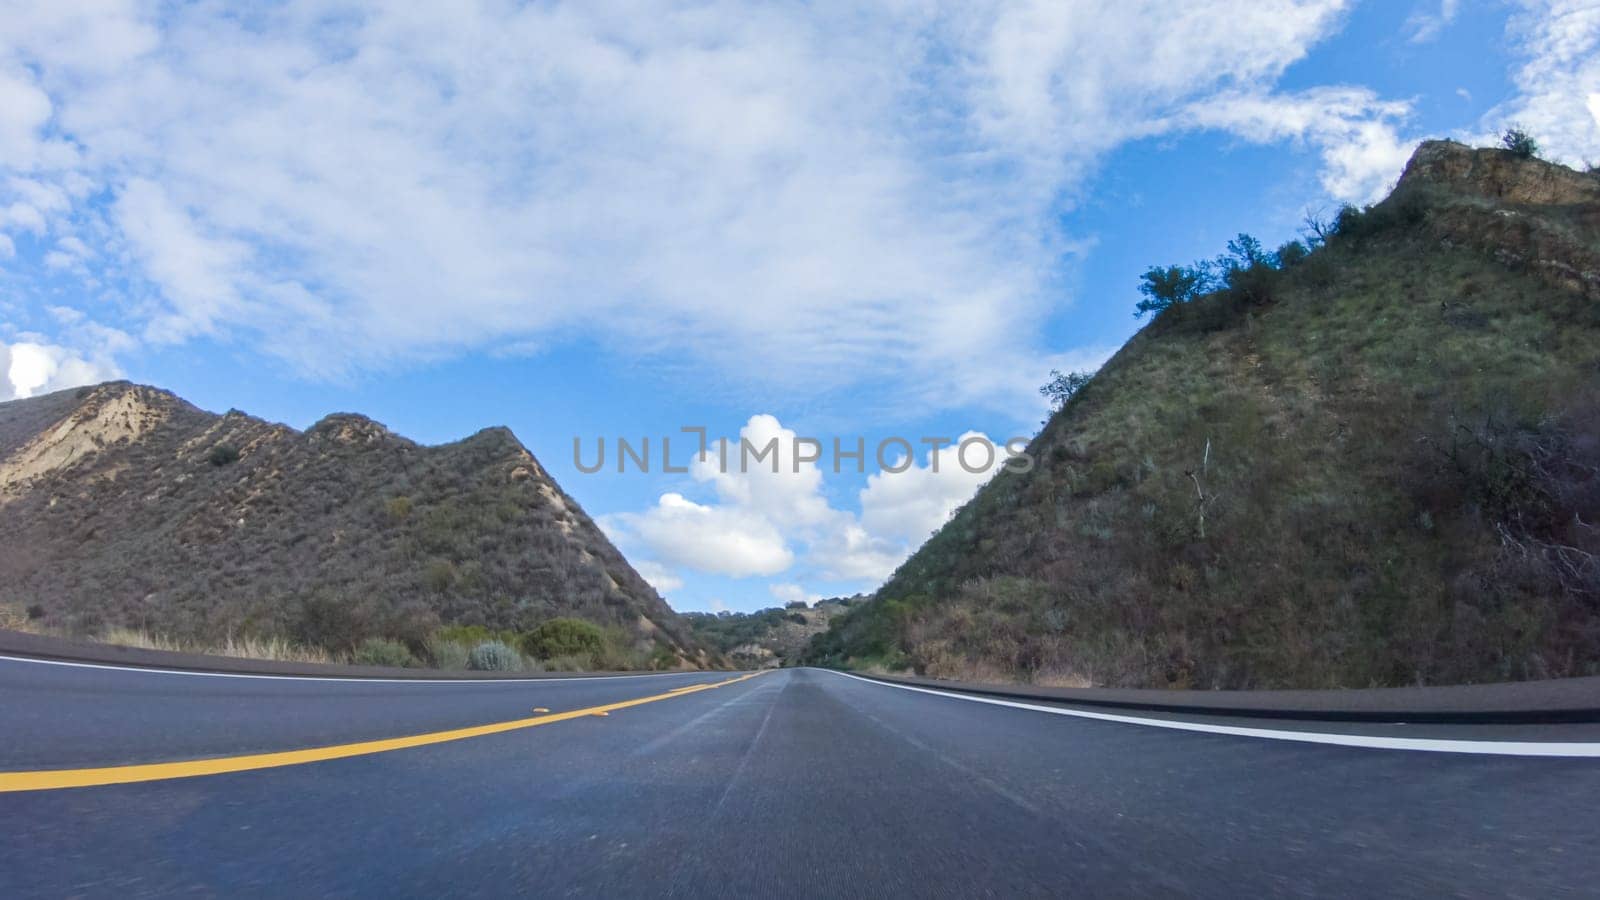 Vehicle is cruising along the Cuyama Highway under the bright sun. The surrounding landscape is illuminated by the radiant sunshine, creating a picturesque and inviting scene as the car travels through this captivating area.